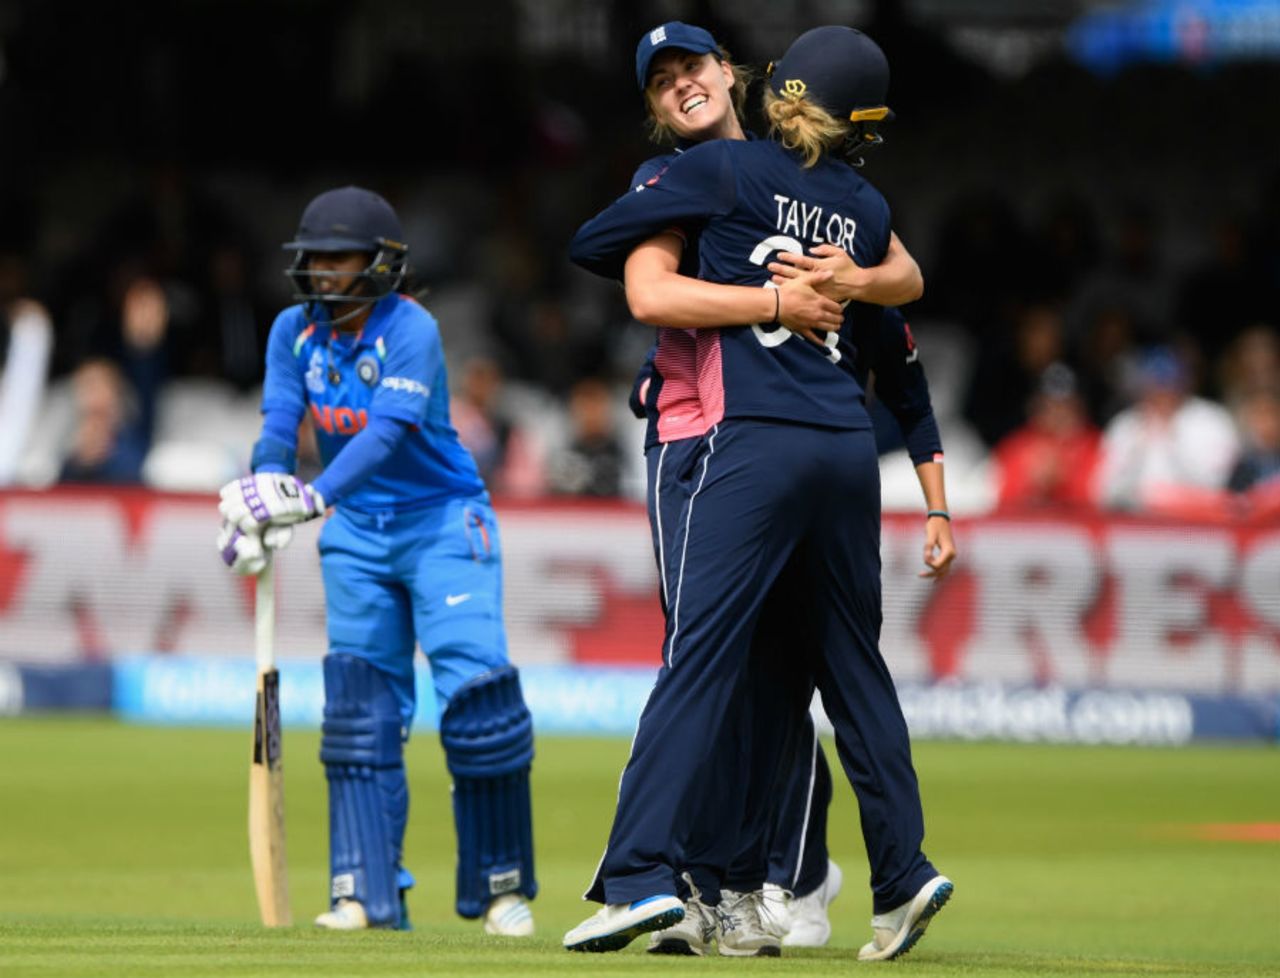 England's reaction after Mithali Raj's run out tells you a story, England v India, Women's World Cup final, Lord's, July 23, 2017